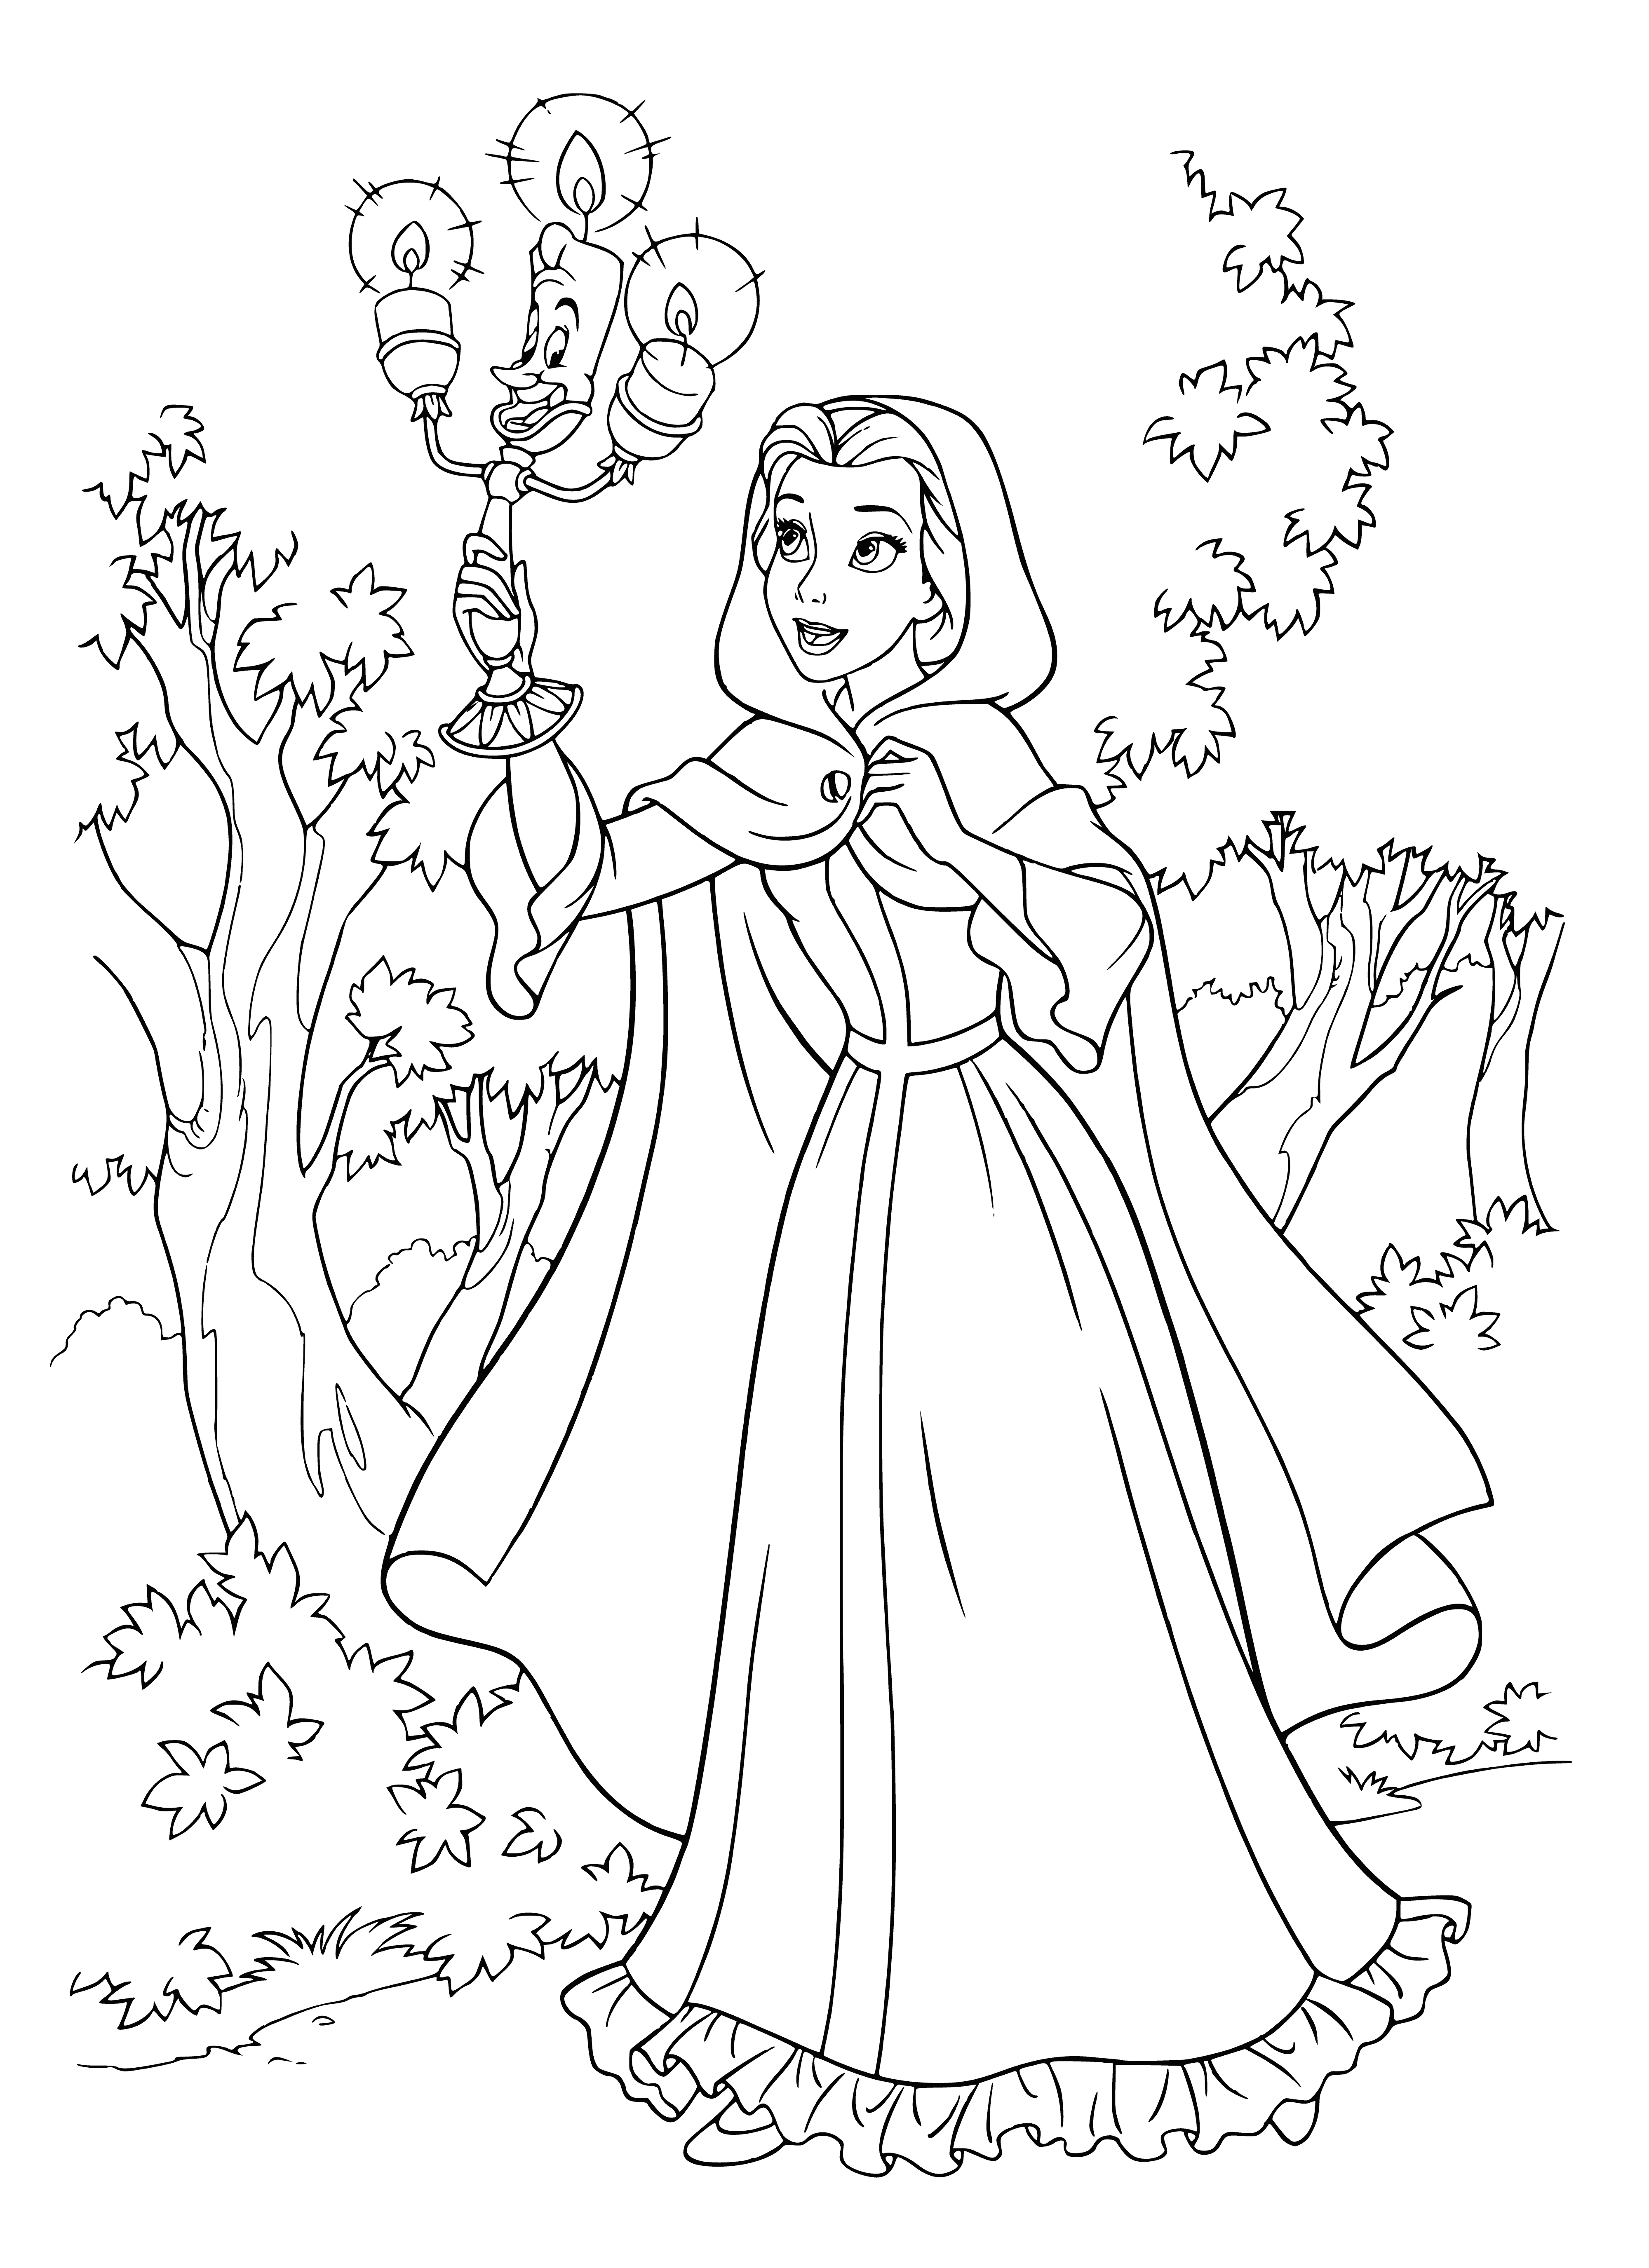 coloring page: Belle meets Lumiere in the Beast's library: he presents her with a candlestick while she holds a book with a questioning look.